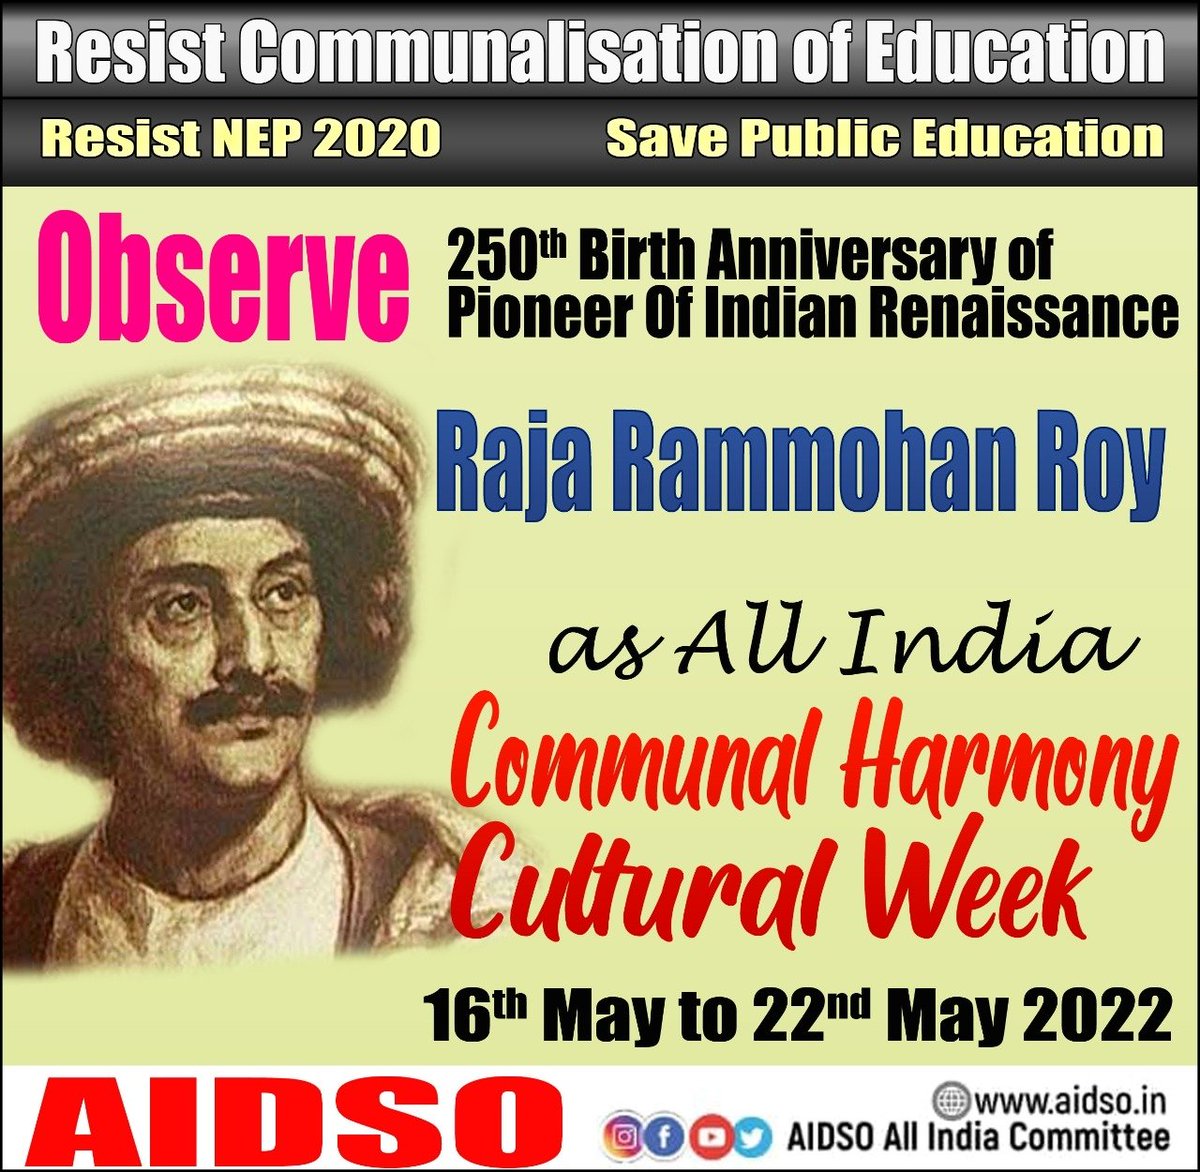 Observe 250th Birth Anniversary of Pioneer of Indian Renaissance
Raja Rammohan Roy as
All India Communal Harmony Cultural week.
From 16th May to 22nd May 2022.
Resist Communalisation of Education.
#AIDSO
#RejectNEP2020 
#savepubliceducation